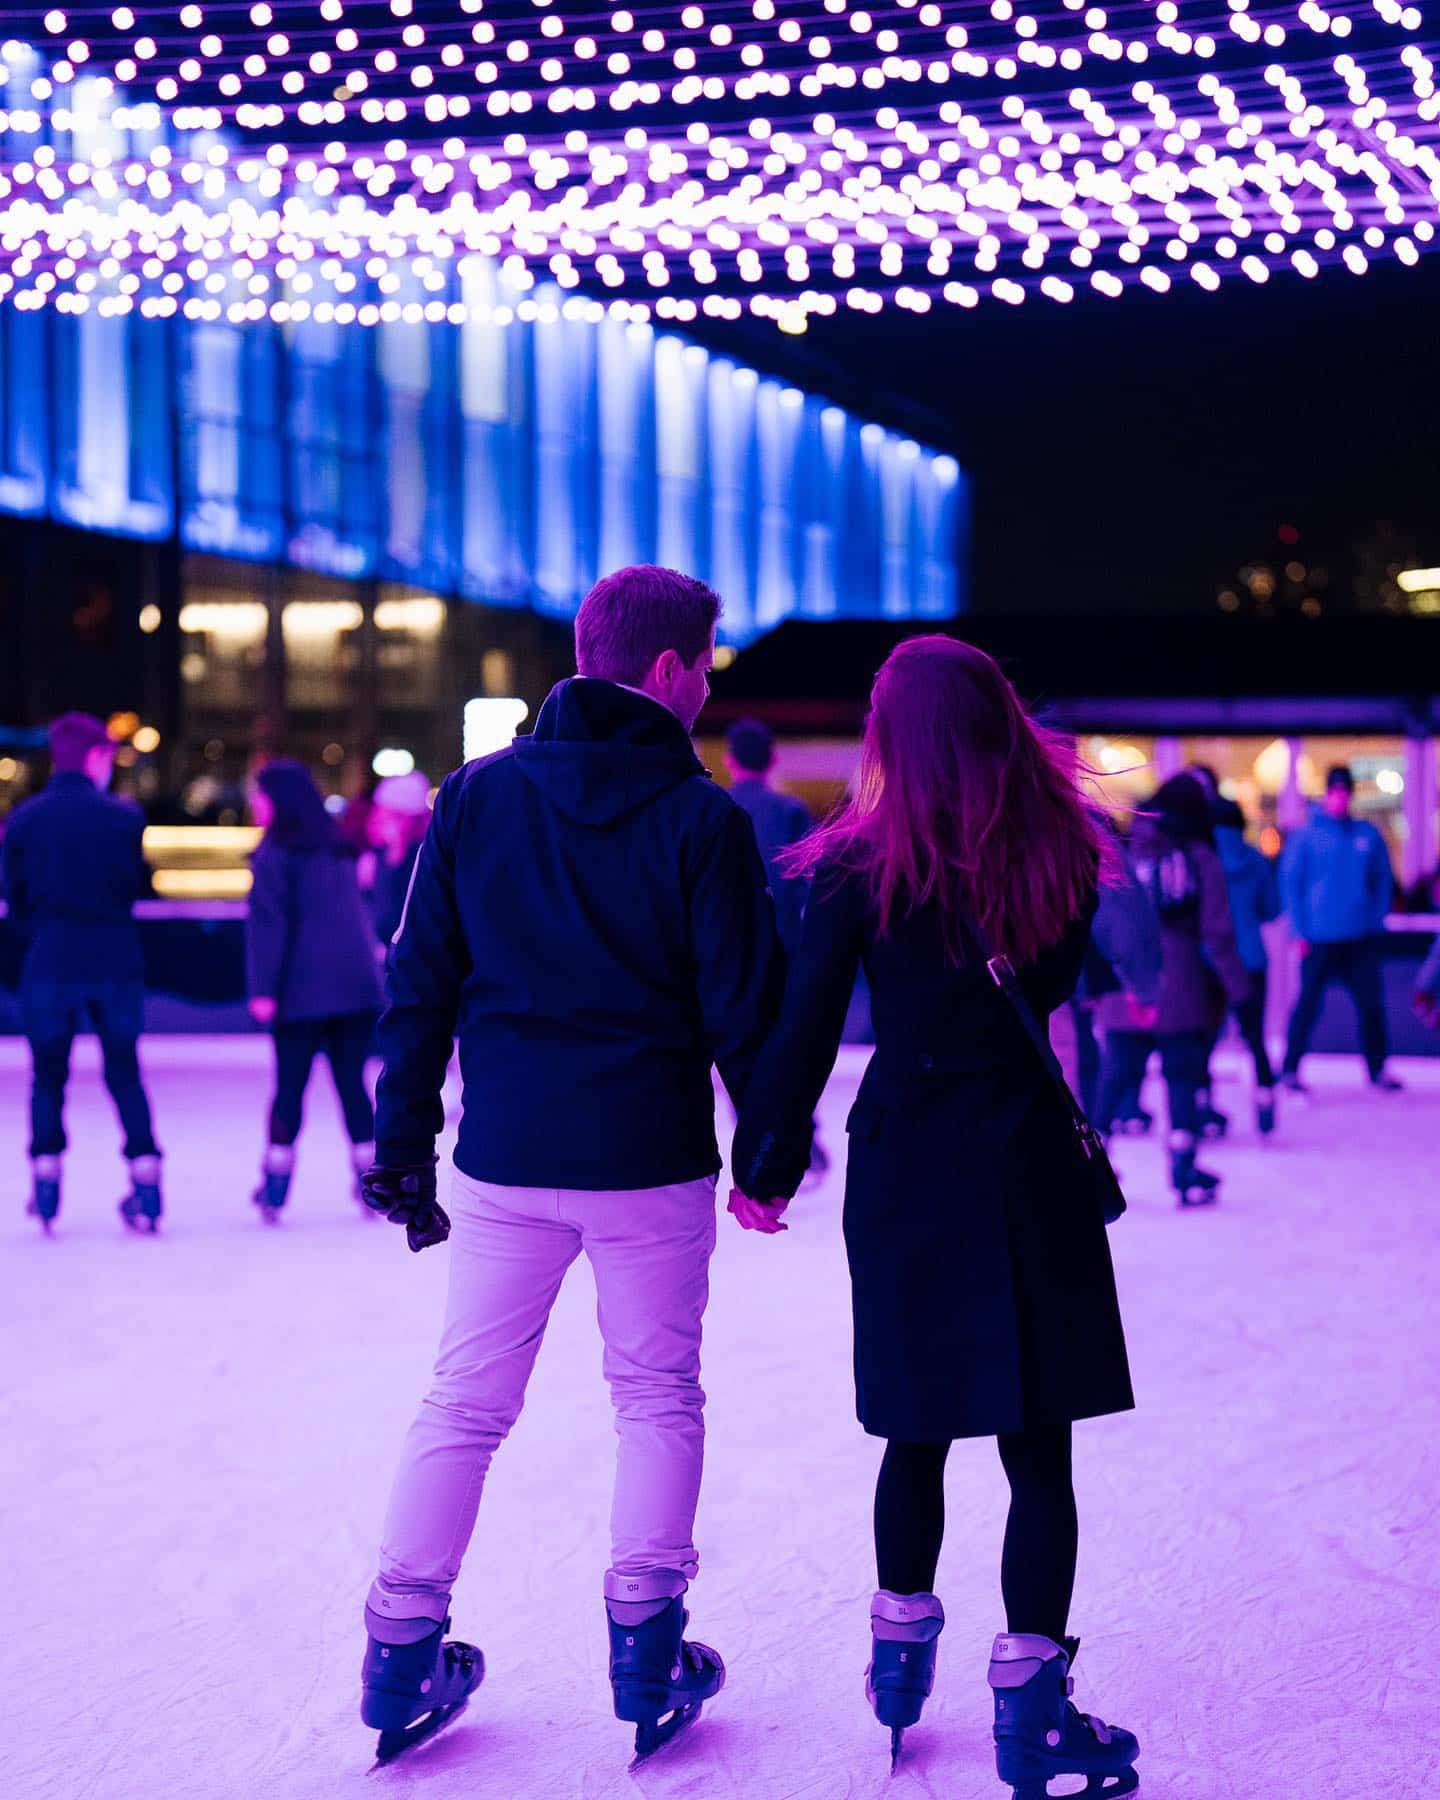 Lace up for your weekend adventure⛸️

Weekend Hours 
Sat: 10am – 11pm
Sun: 10am – 10pm 

Book now ➤ link in bio.